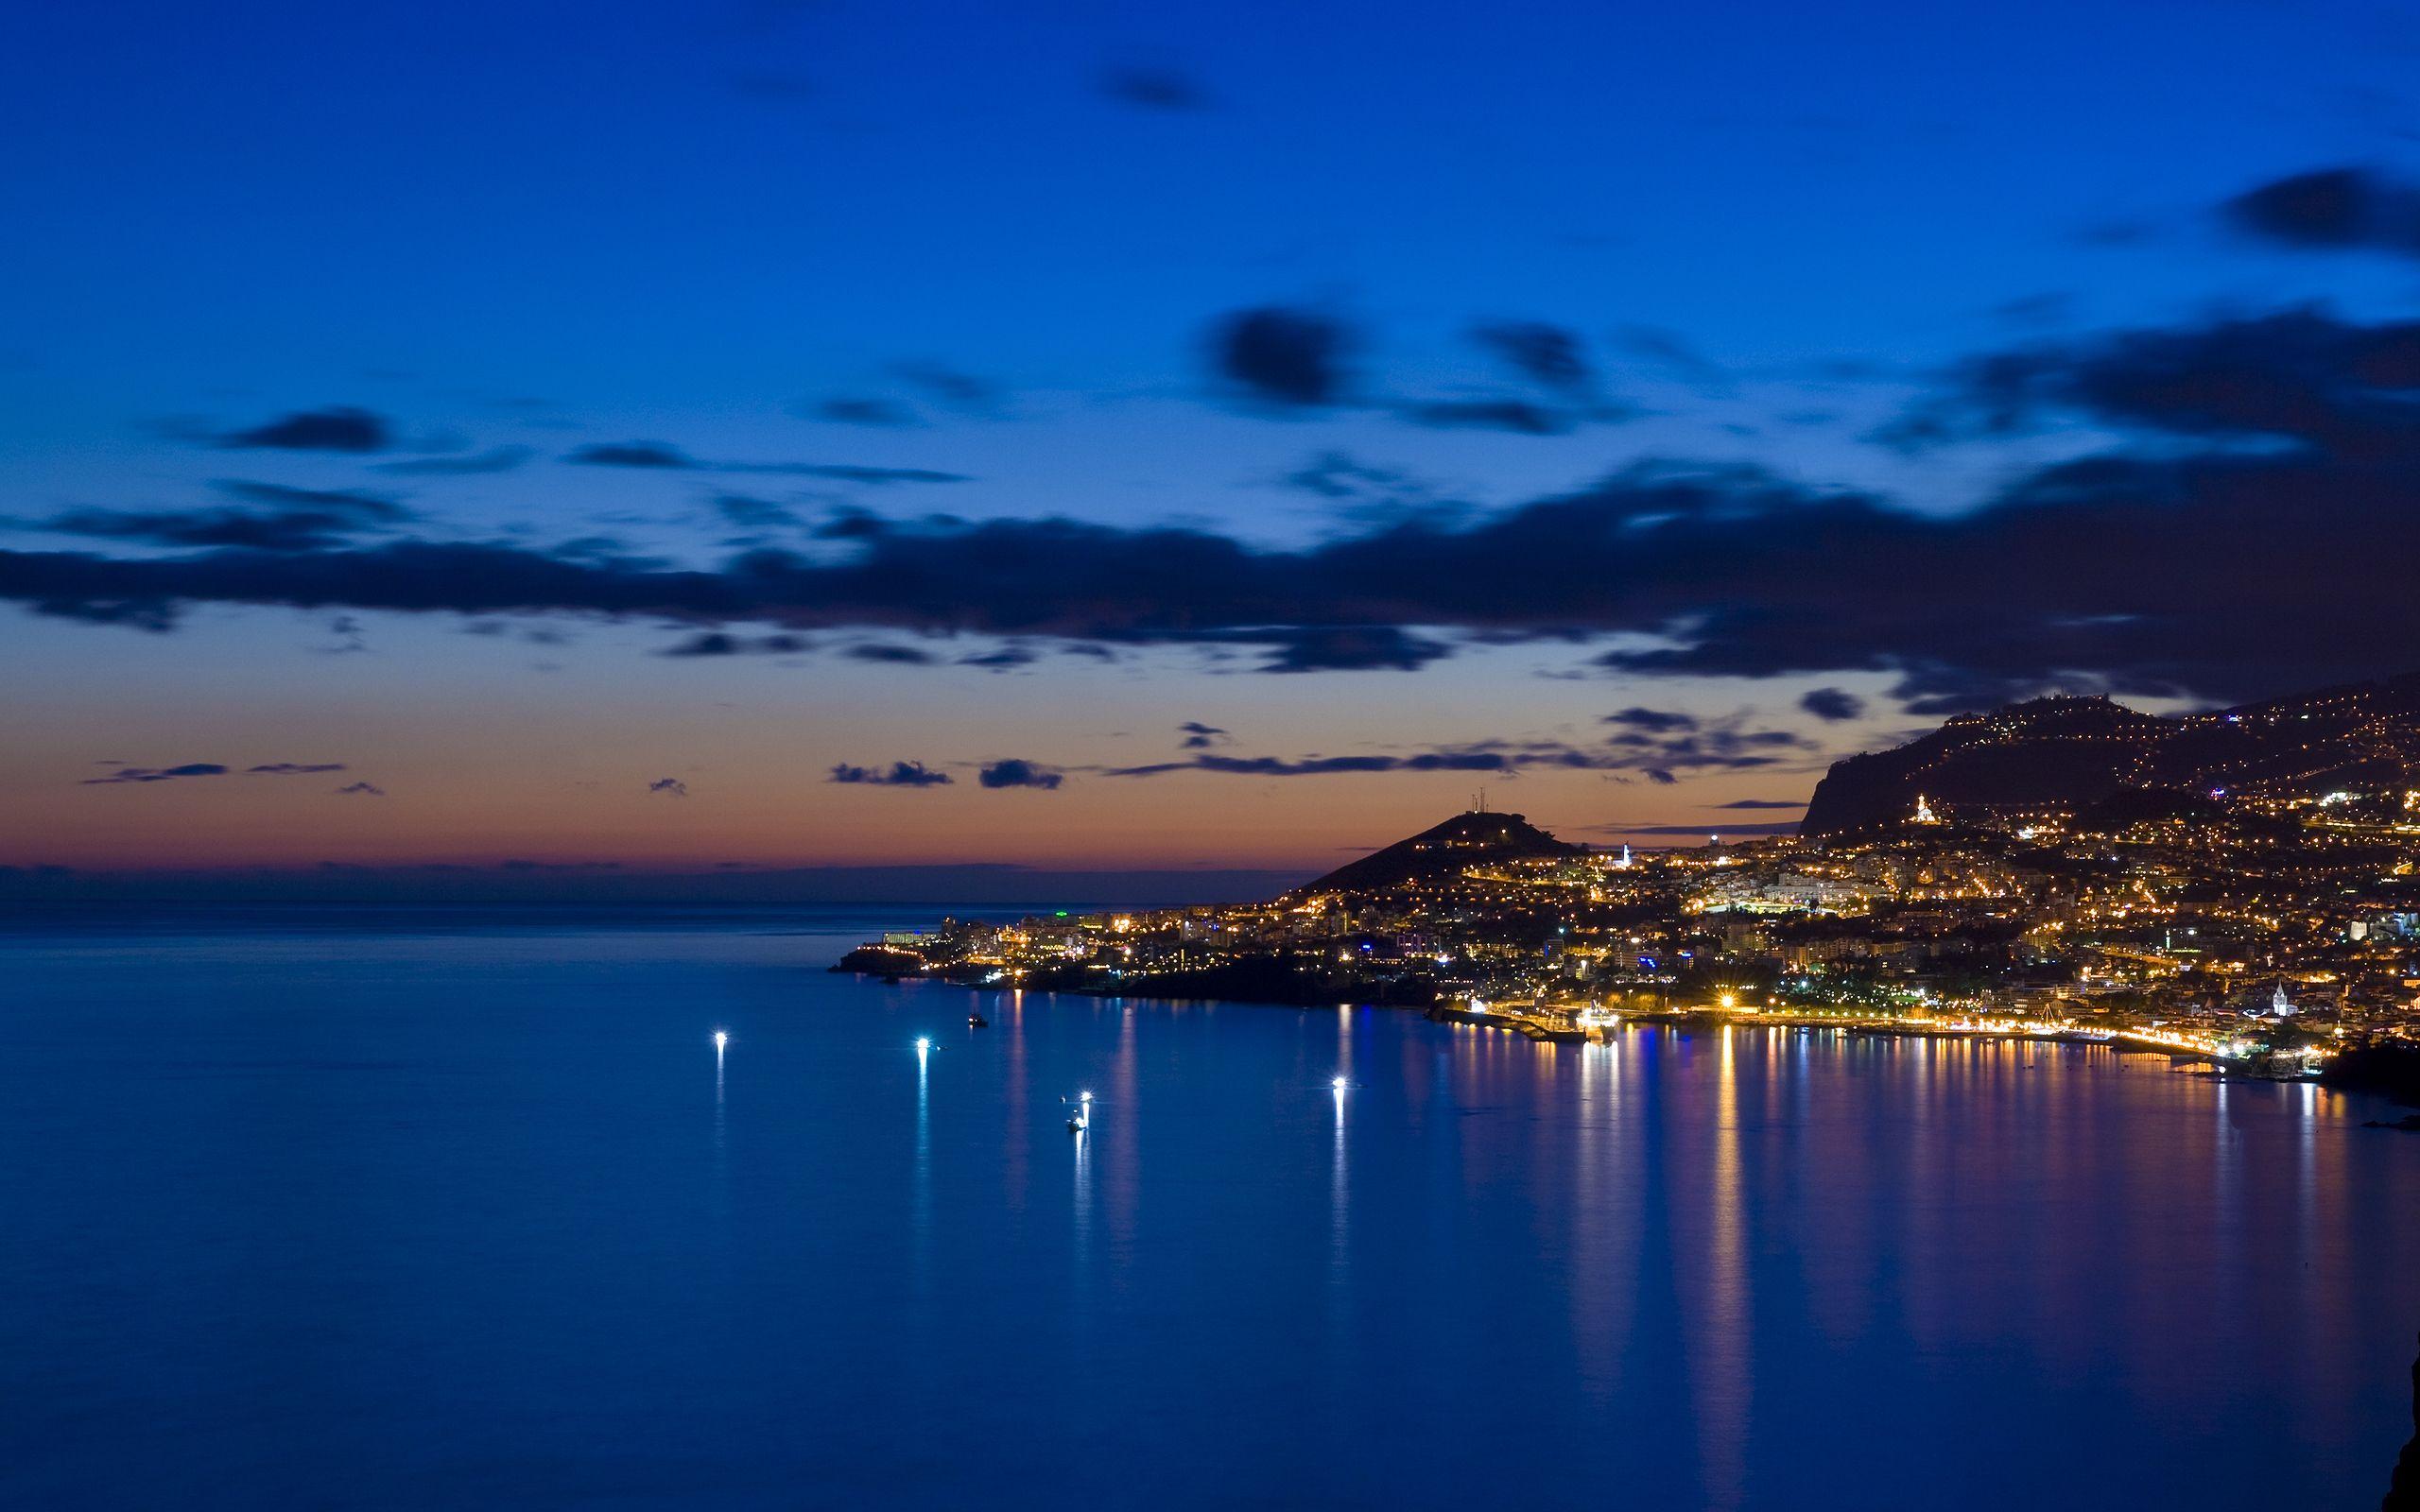 Sea And City At Night. Free Desktop Wallpaper for Widescreen, HD